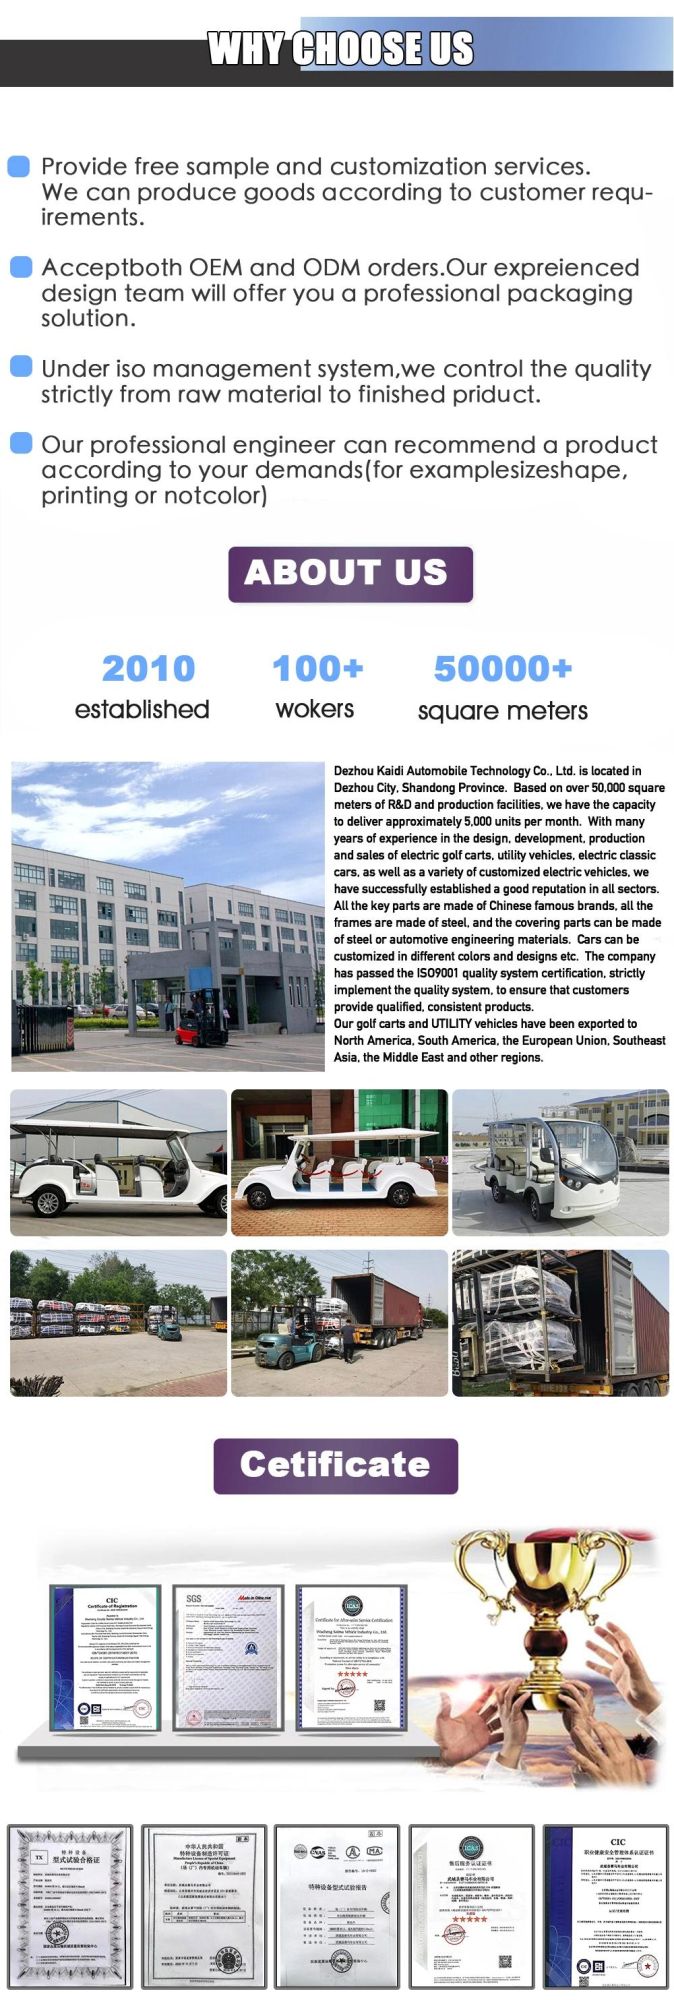 China Hot Sale Universal Electric Tour 11 Sets Shuttle Sightseeing Buggy Bus &Car Tourist Vehicle